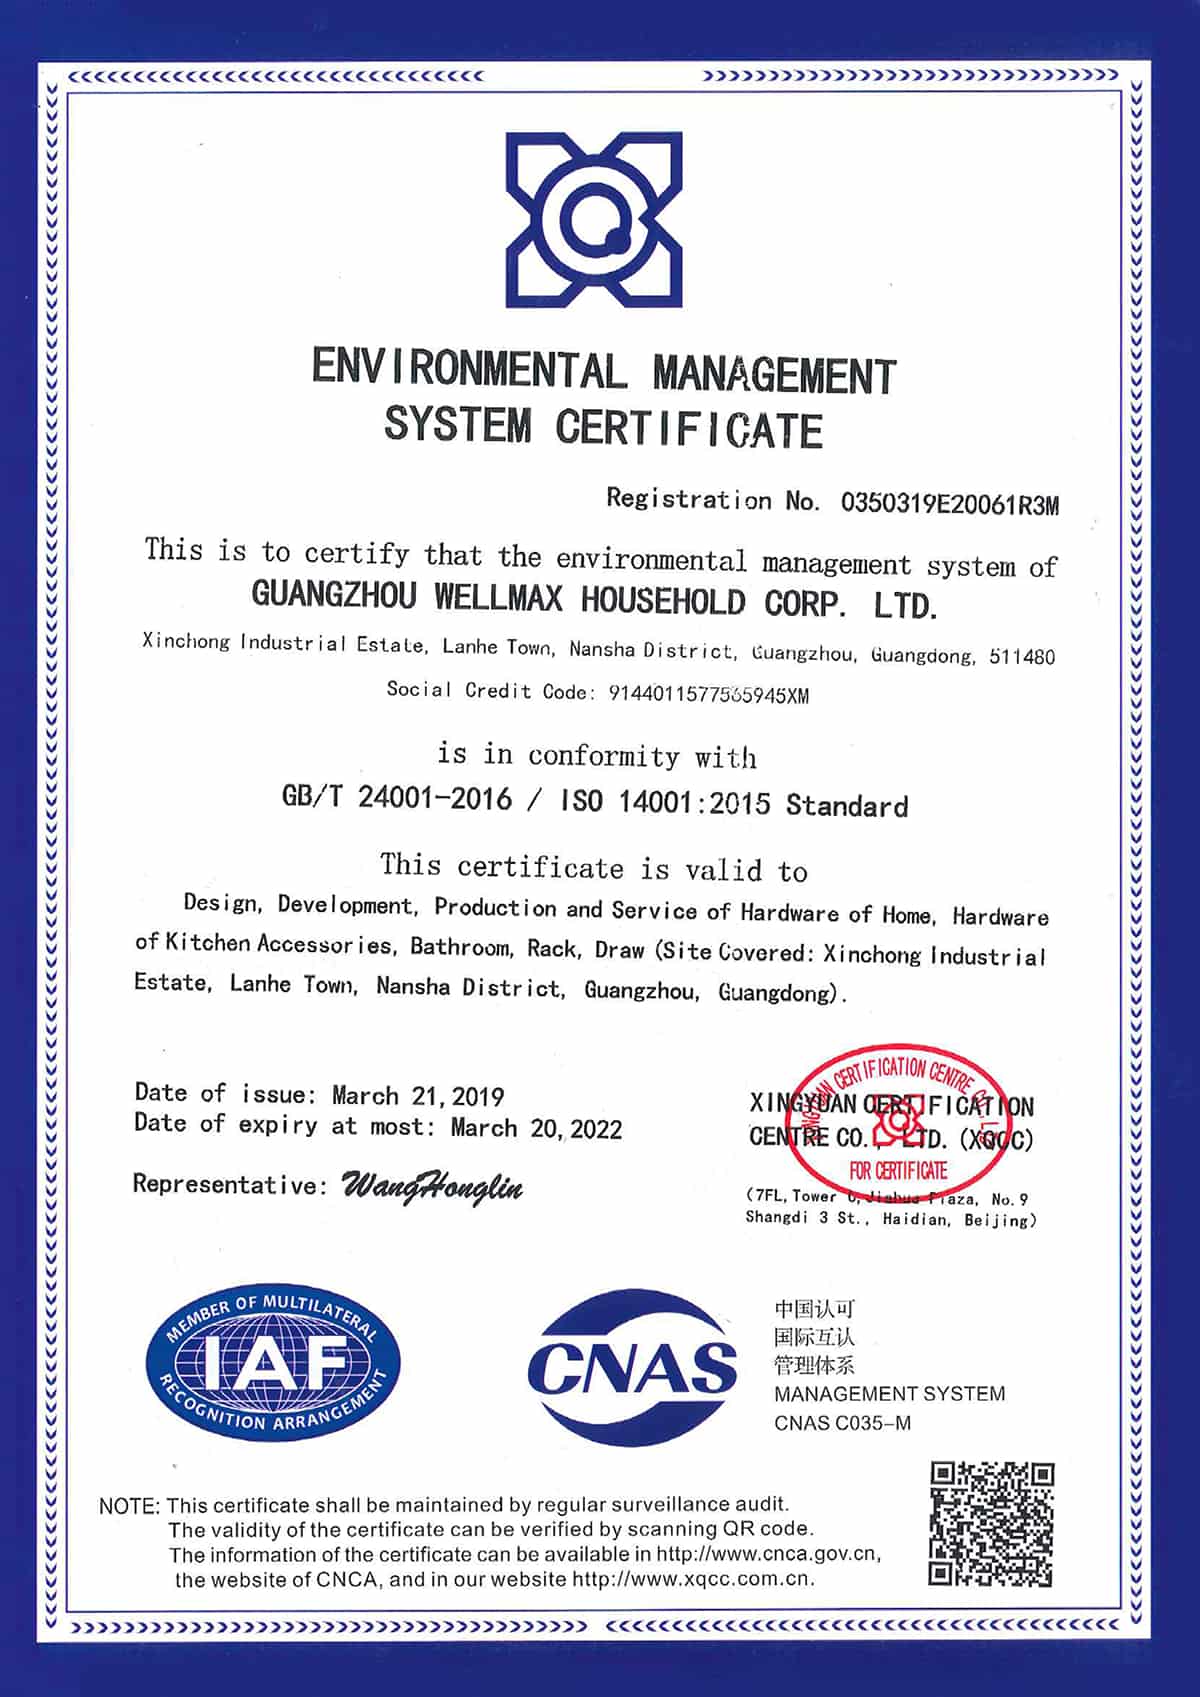 Environmental Management System Certificate 2020